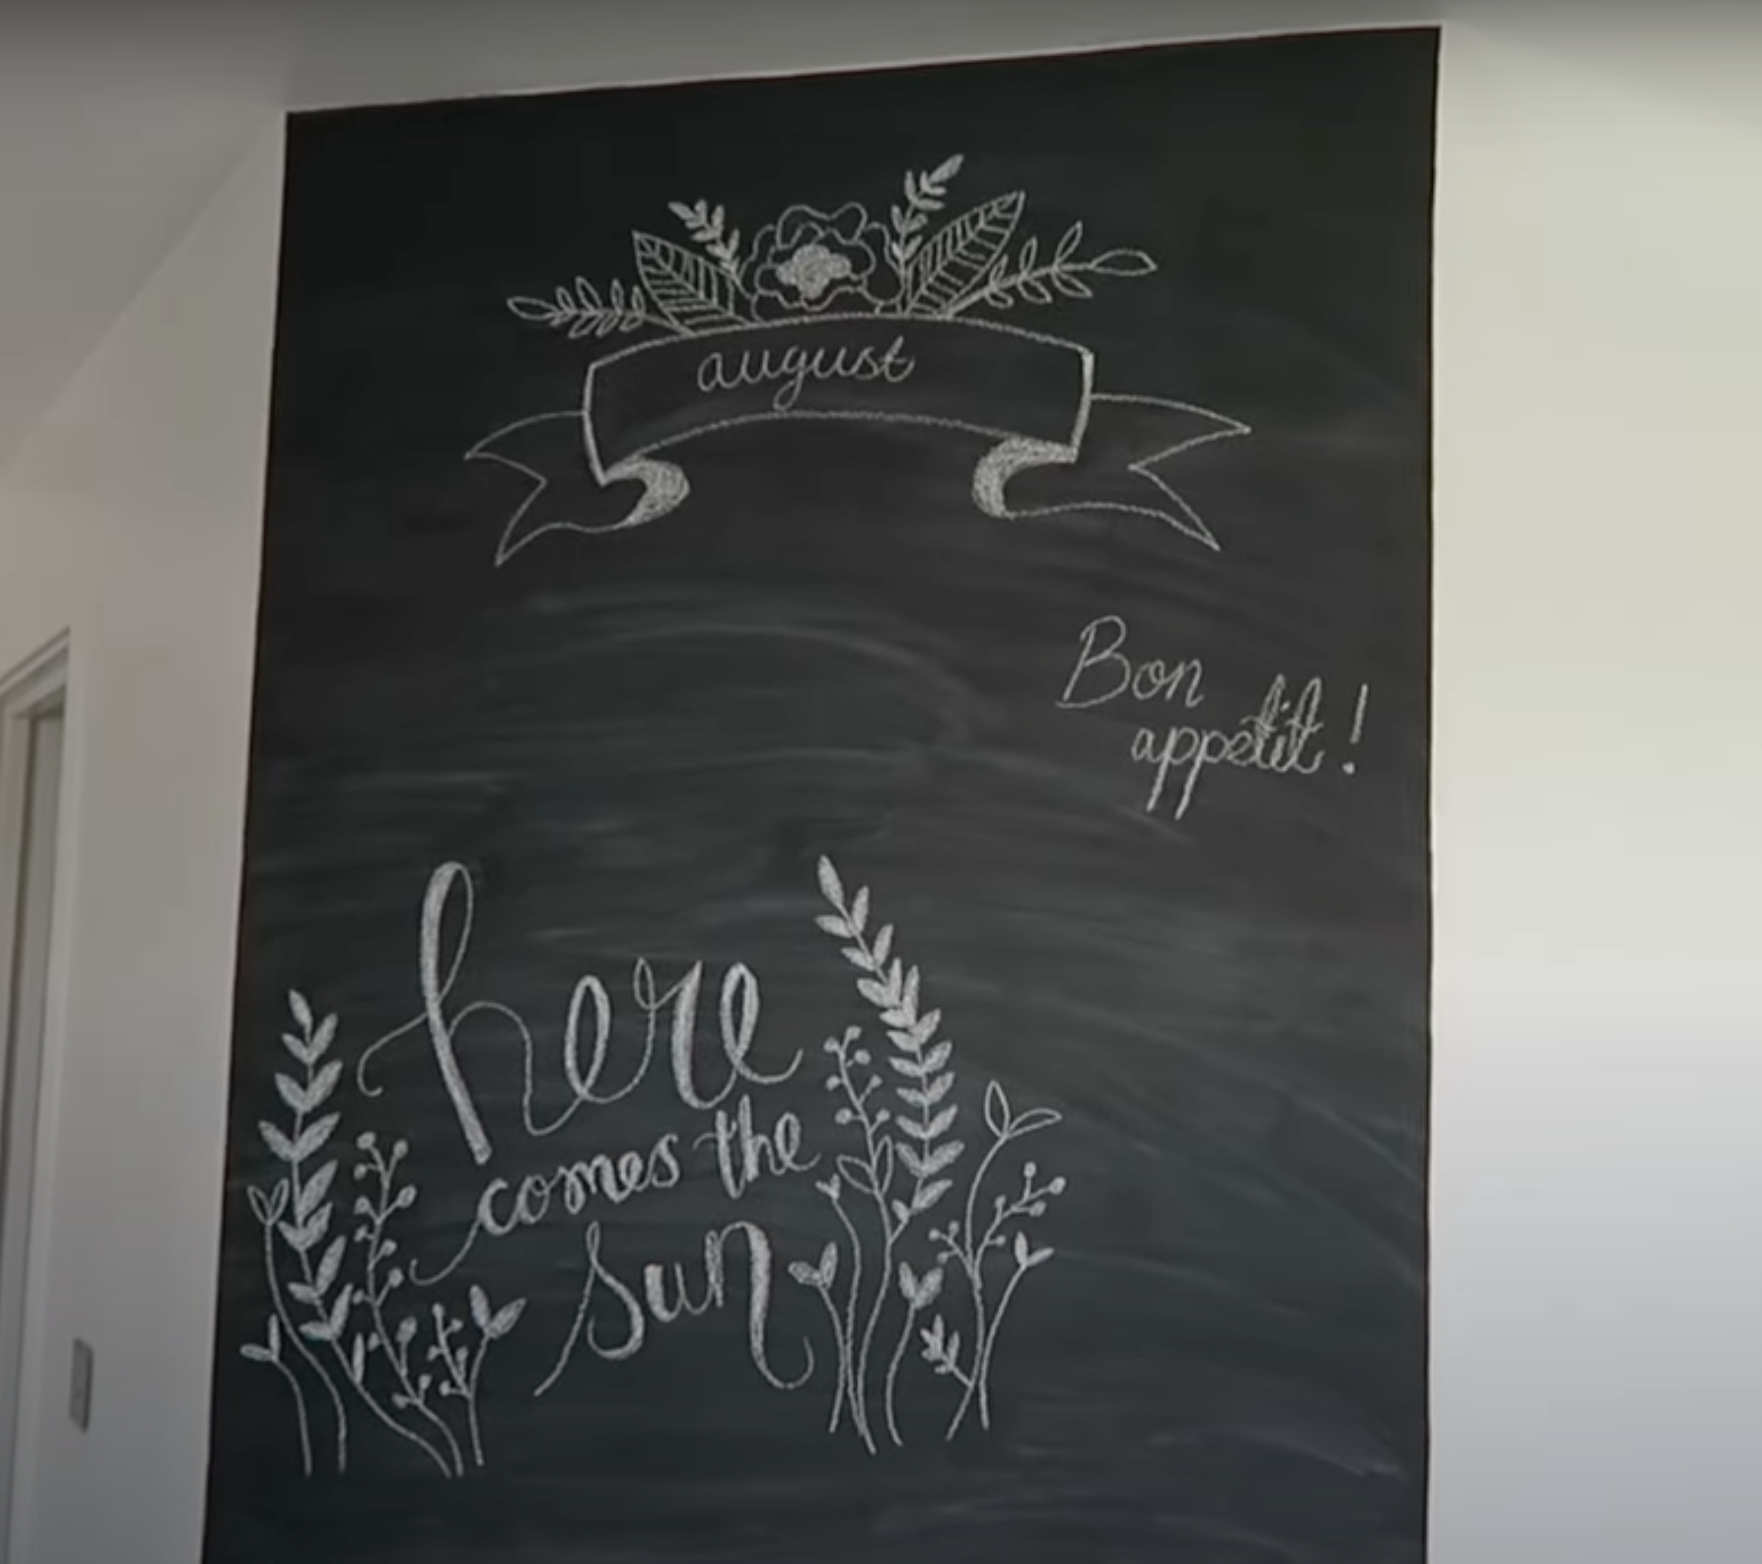 Large chalkboard wall with various text written on it